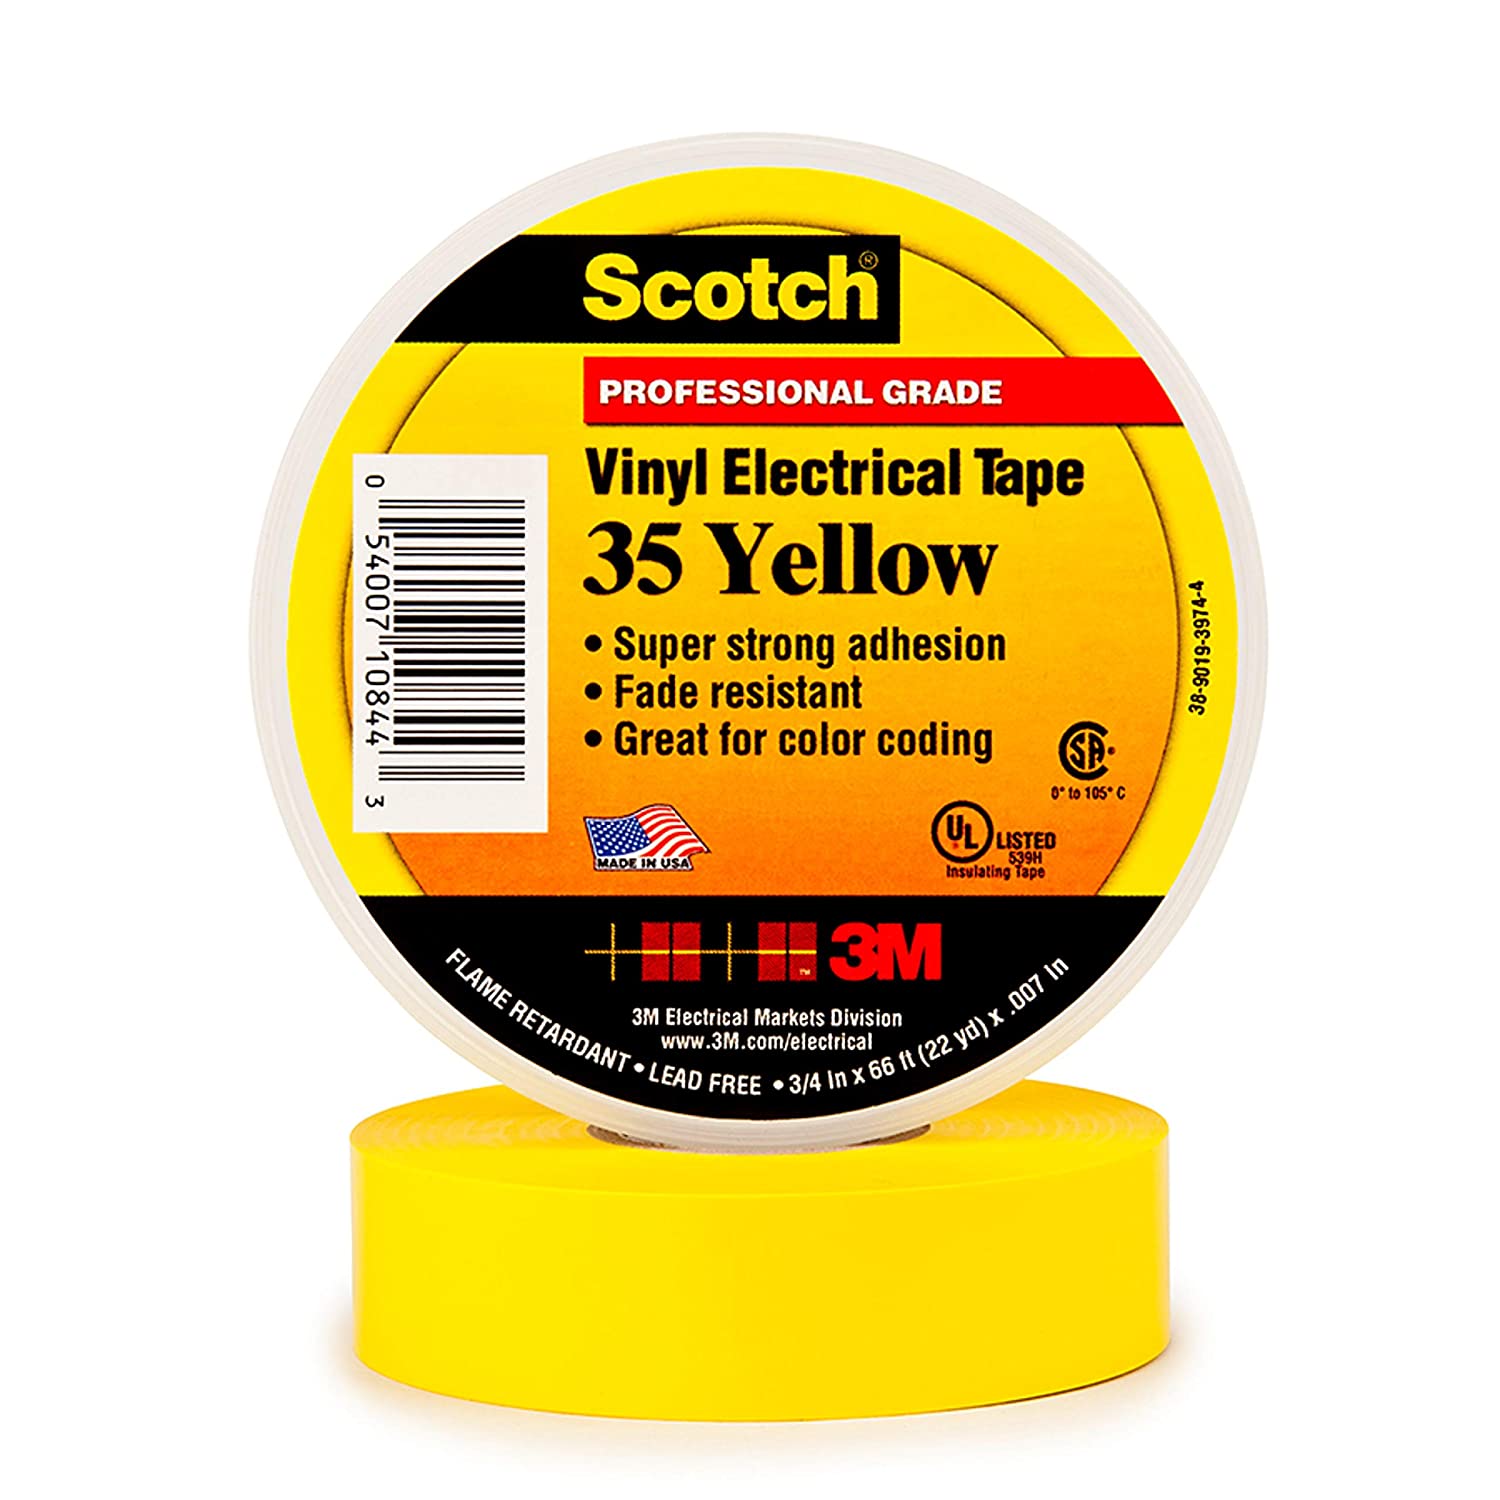 Scotch Vinyl Tape for Adult or Kids BJJ Belts (White, Red or Yellow) - Budovideos